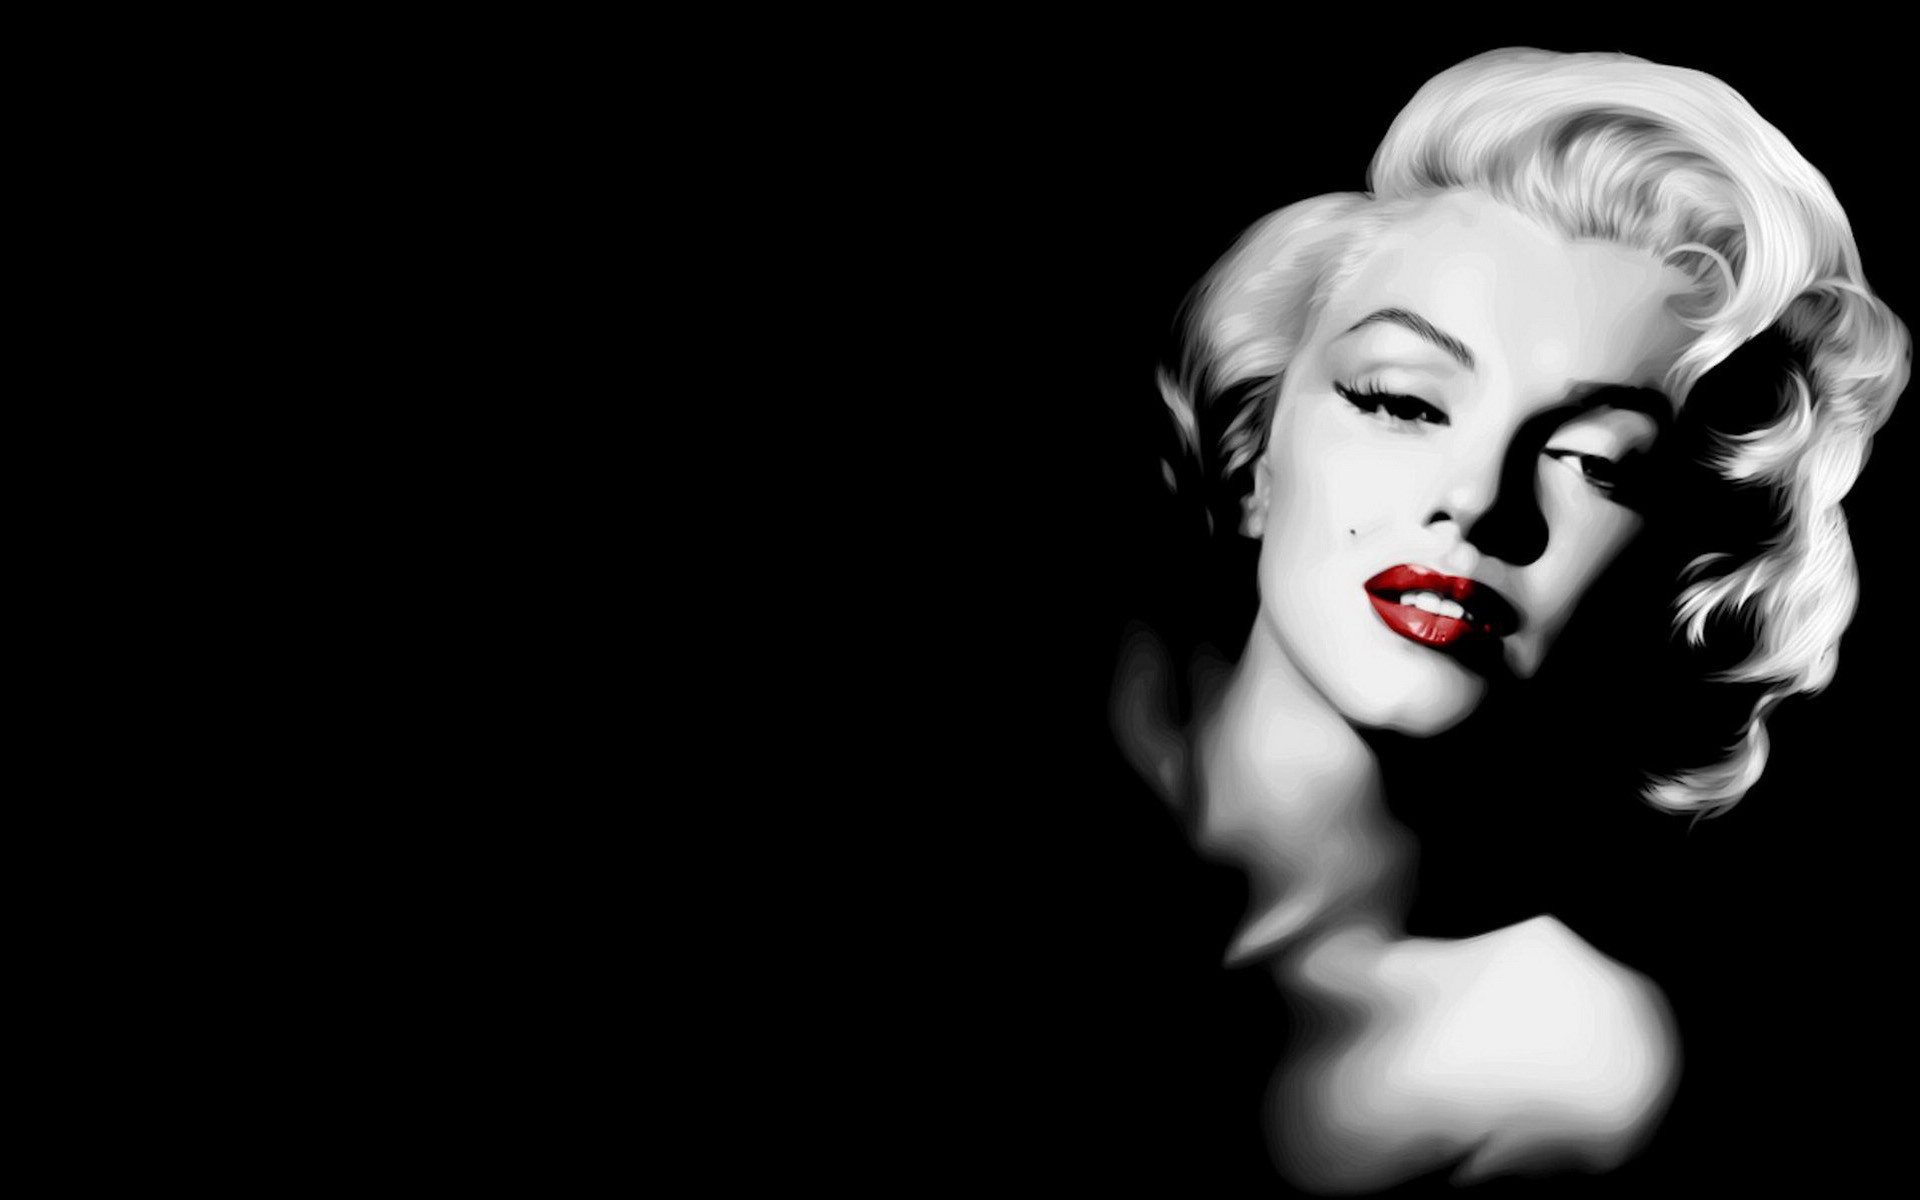 1920x1200 Related Wallpapers from Keith Richards. Marilyn Monroe Wallpaper